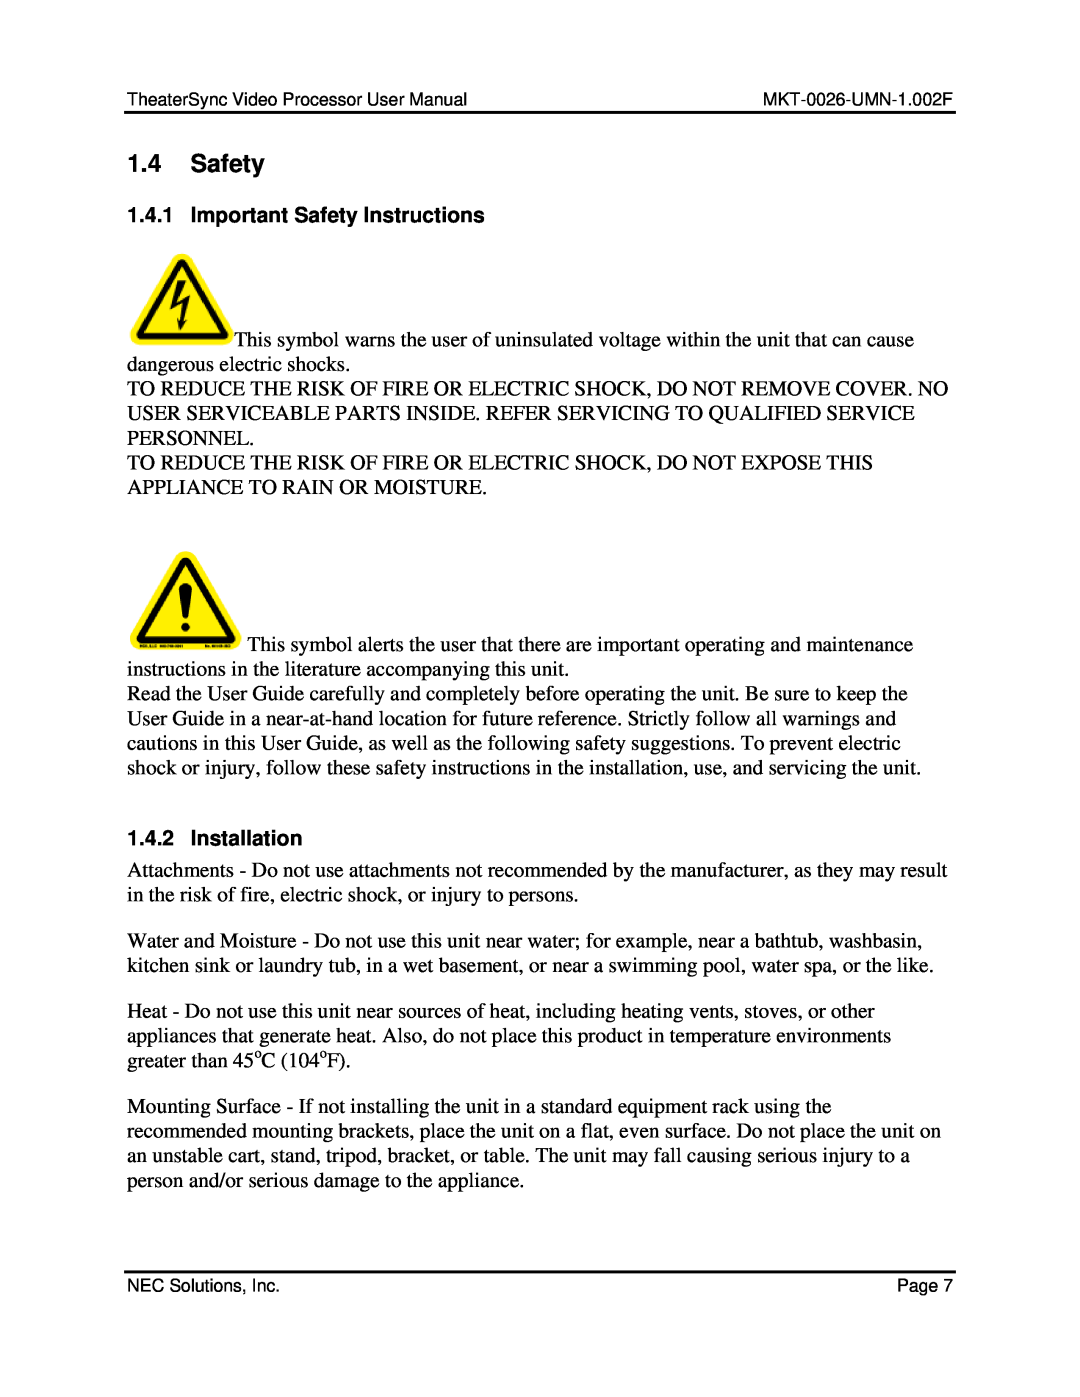 NEC TheaterSync Video Processor user manual 1.4Safety, Important Safety Instructions, Installation 